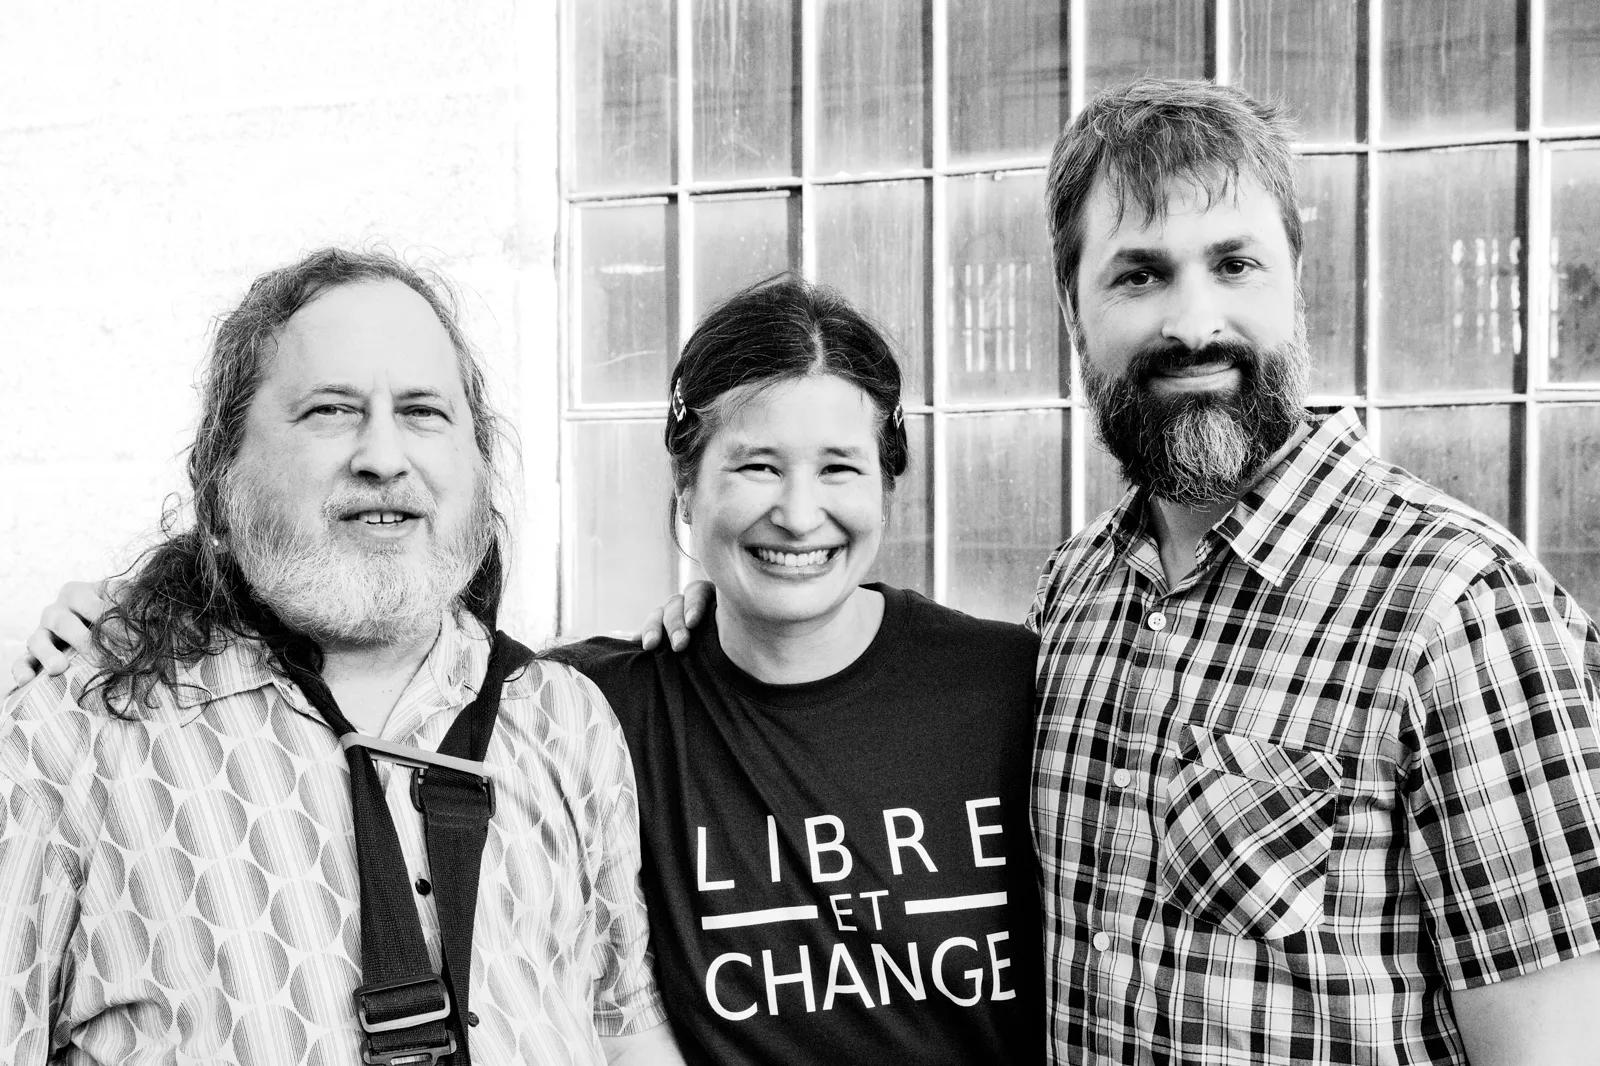 RMS, Kimiko Ishizaka, and Robert Douglass at the RMLL free software festival in France. Photo by Julie Cotinaud.